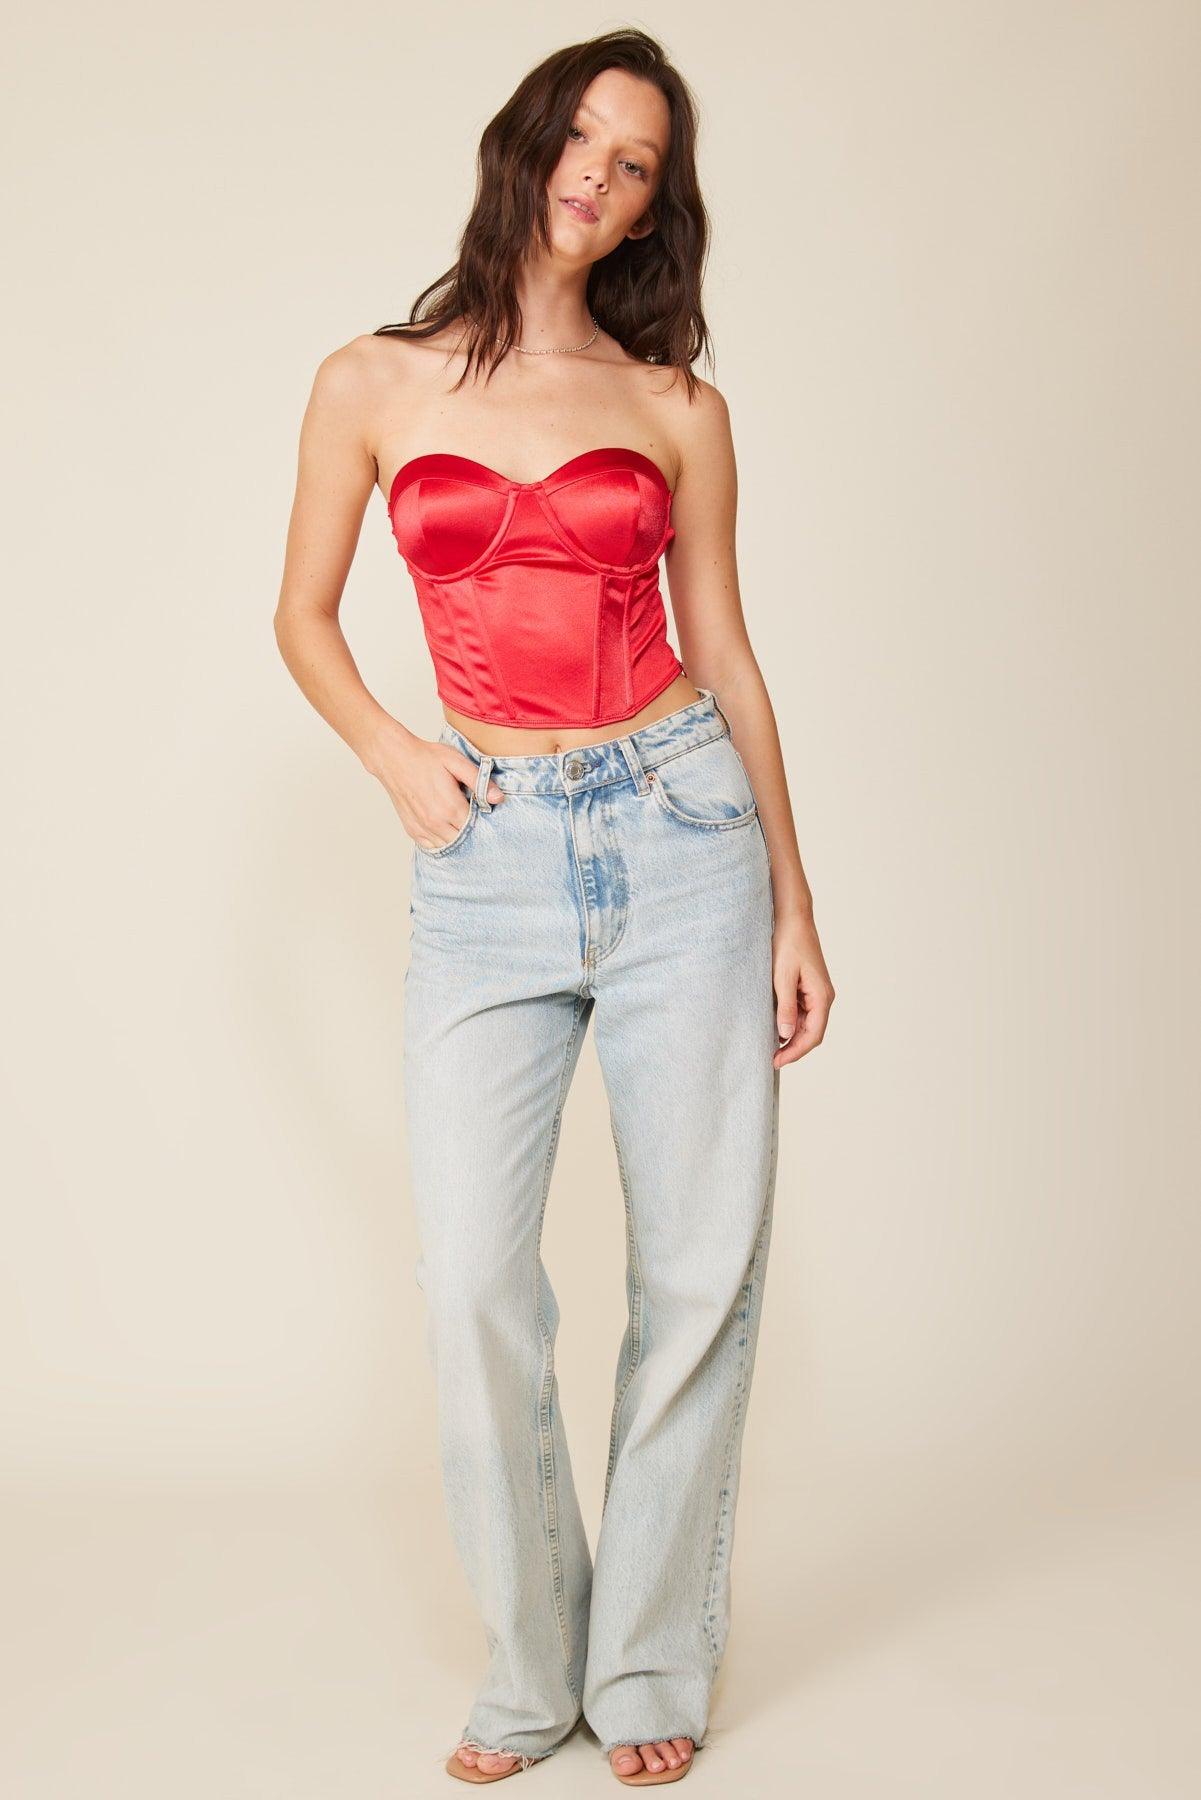 strapless padded satin bustier top - RK Collections Boutique